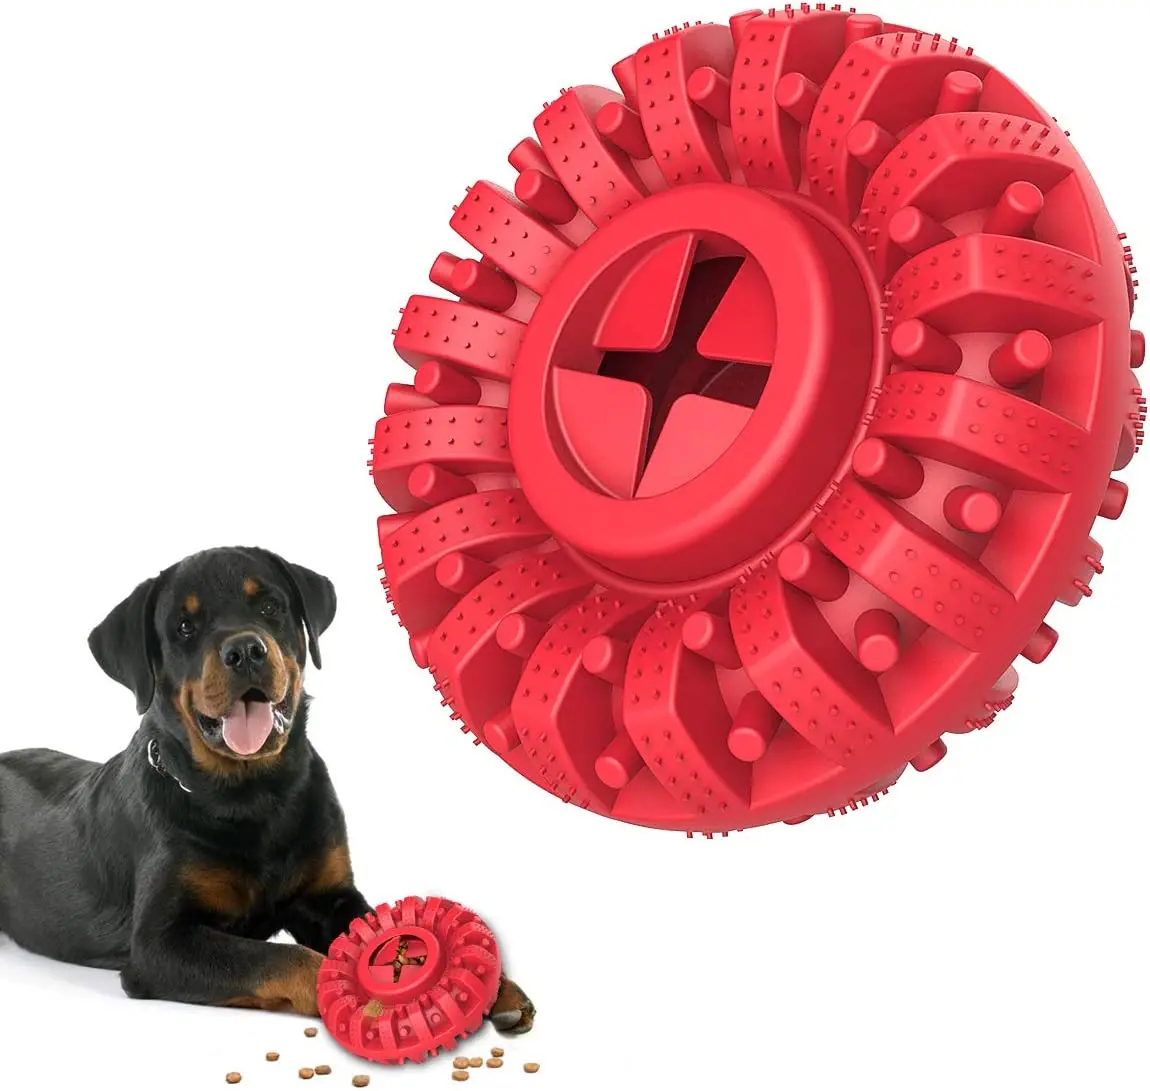 https://ae01.alicdn.com/kf/S2e343d3b1f3e45ab941febc912ad39032/Dog-Chew-Toys-for-Aggressive-Chewers-Durable-Natural-Rubber-Indestructible-Dog-Toys-Treat-Dispenser-for-Medium.jpg